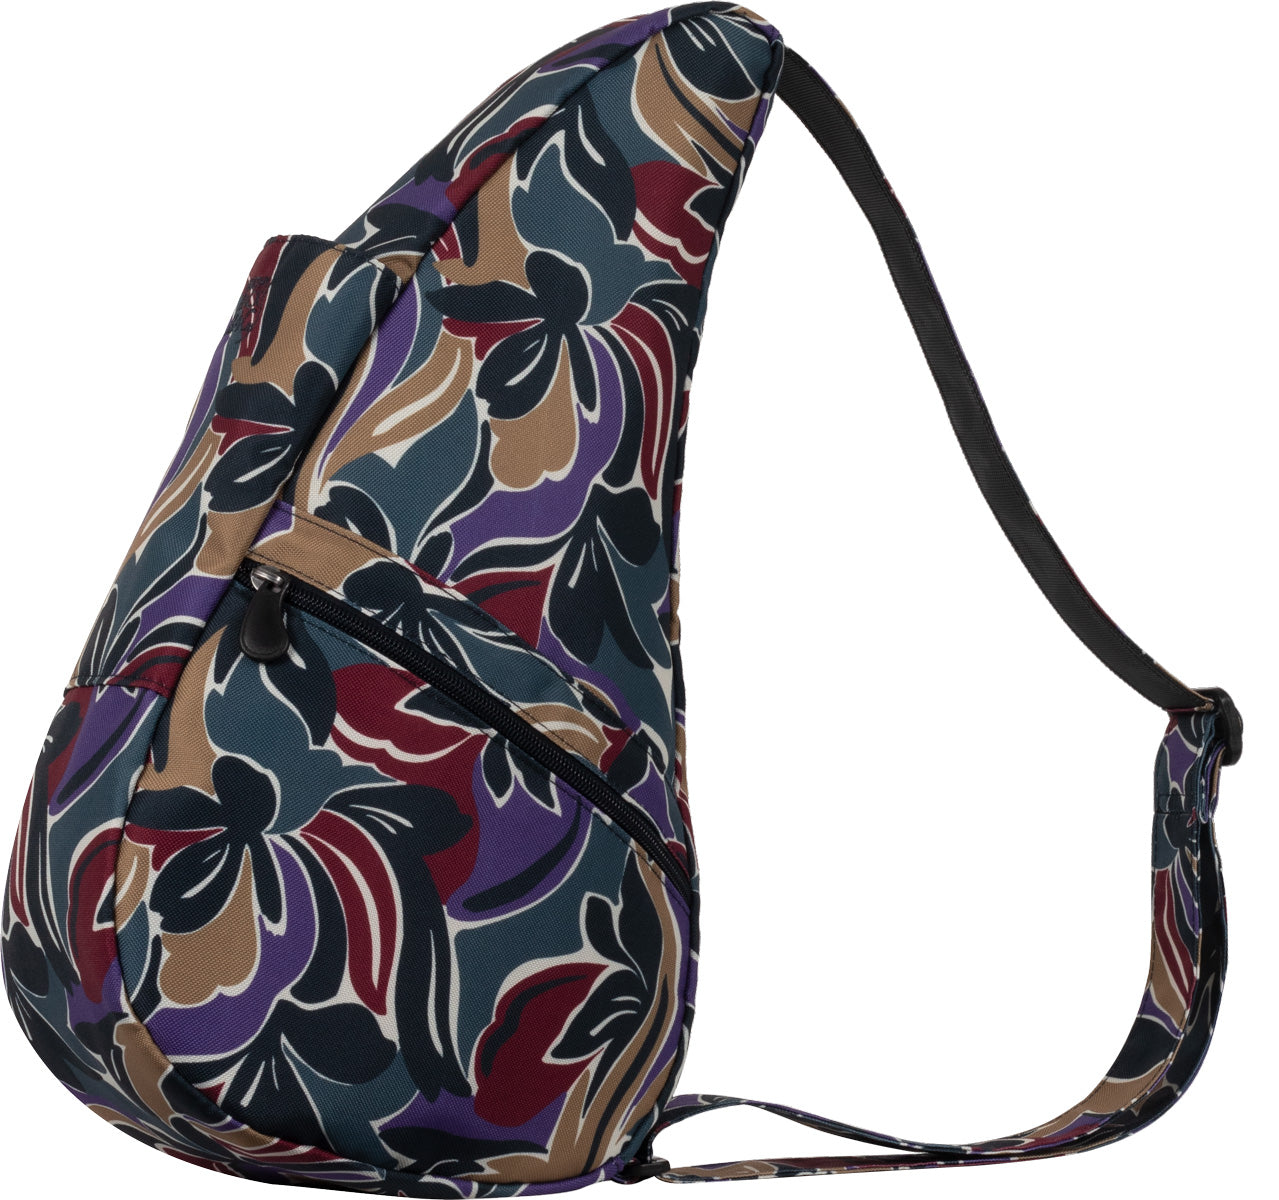 AmeriBag Small Healthy Back Bag Tote Prints and Patterns (Twilight)